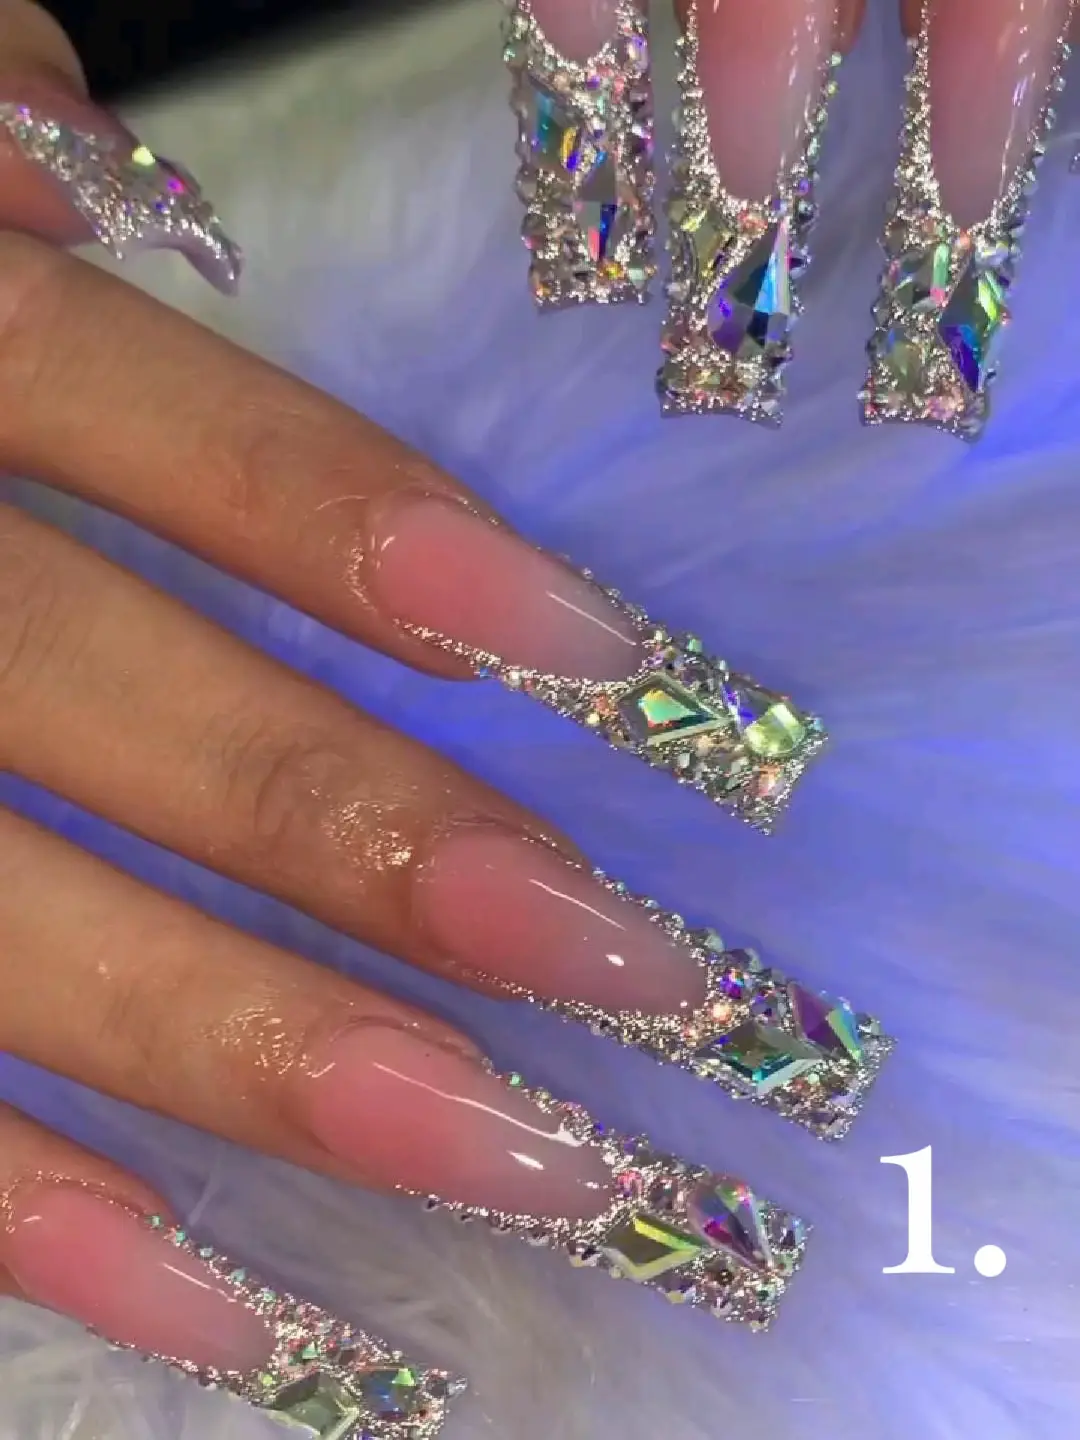 How to apply nail art gems/crystals💎💖, Gallery posted by Tiffany M